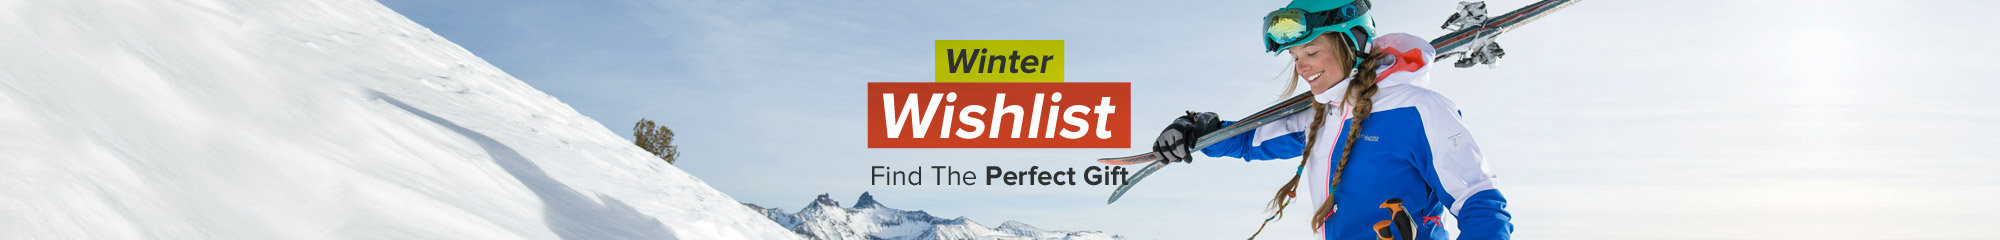 Winter Wishlist - Find the Perfect Gift